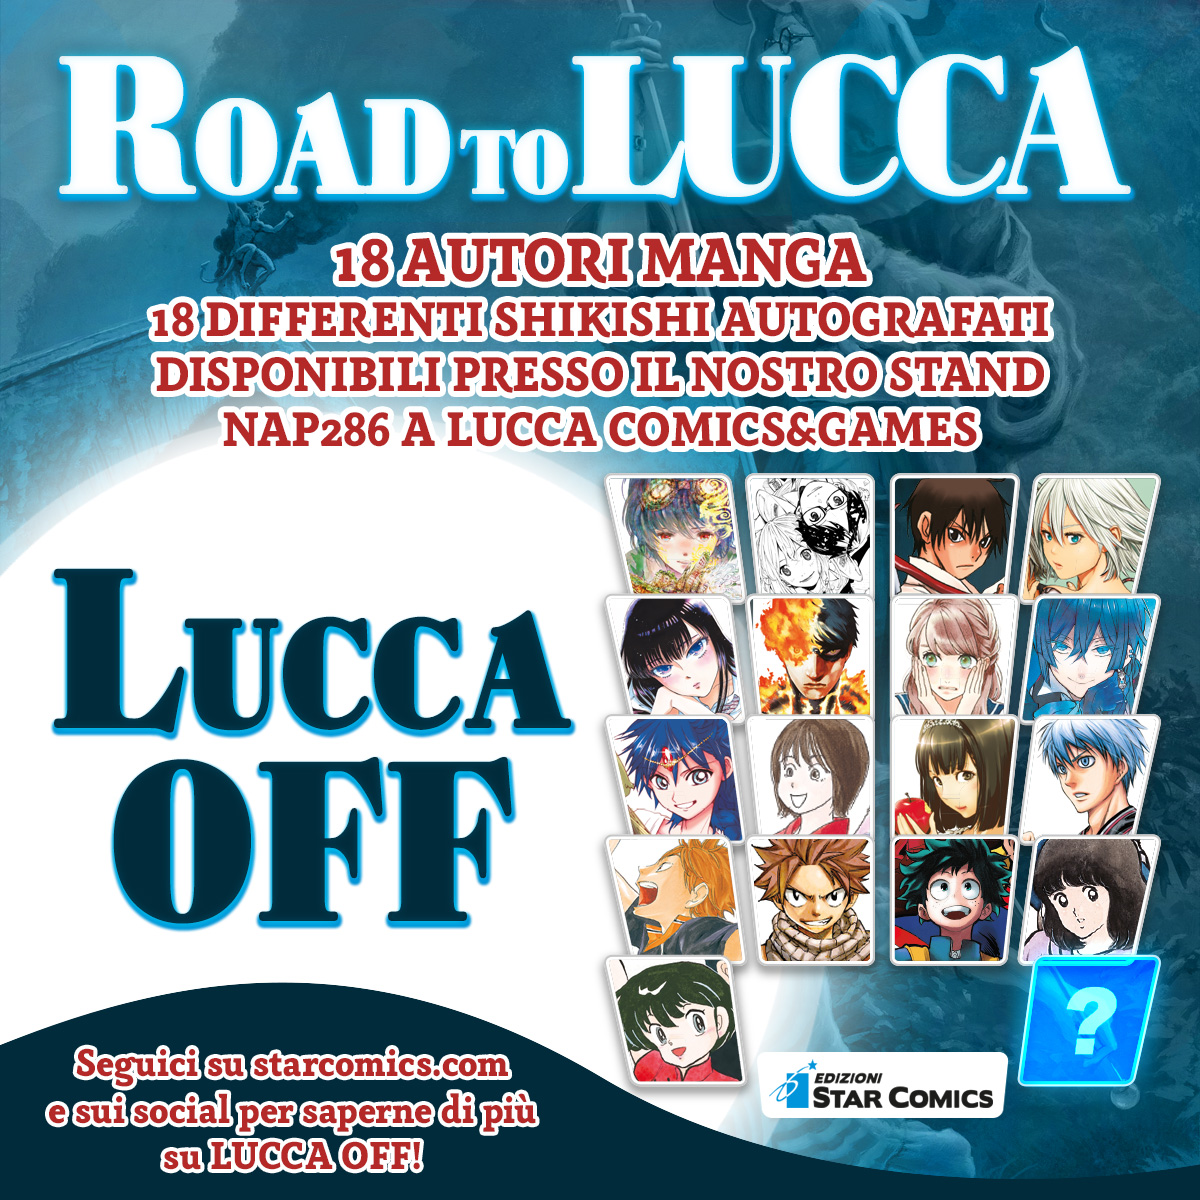 LUCCA OFF